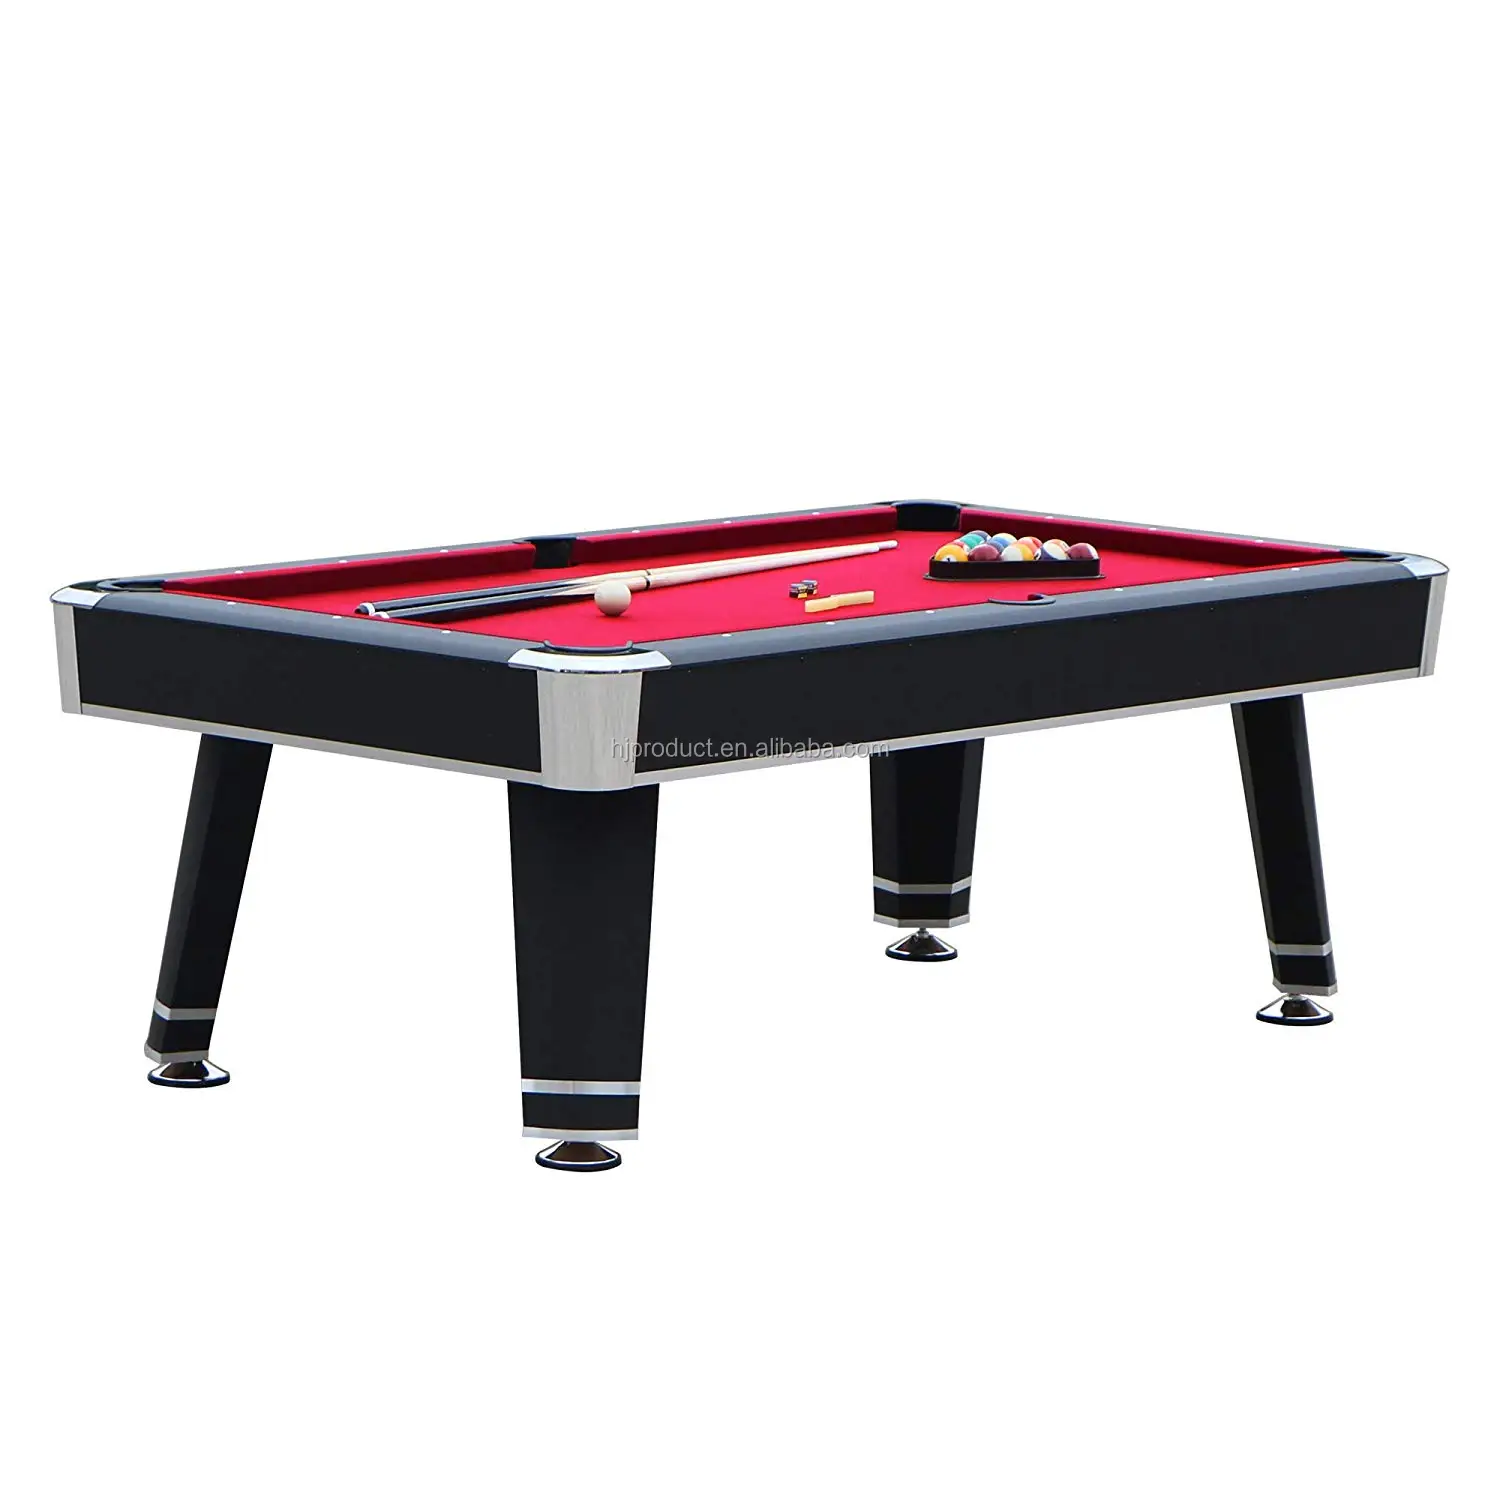 Factory New Style 7 Pool Table Black Snooker Table Quick Assembly Carom Billiard Table With Red Felt Buy 7ft Pool Table